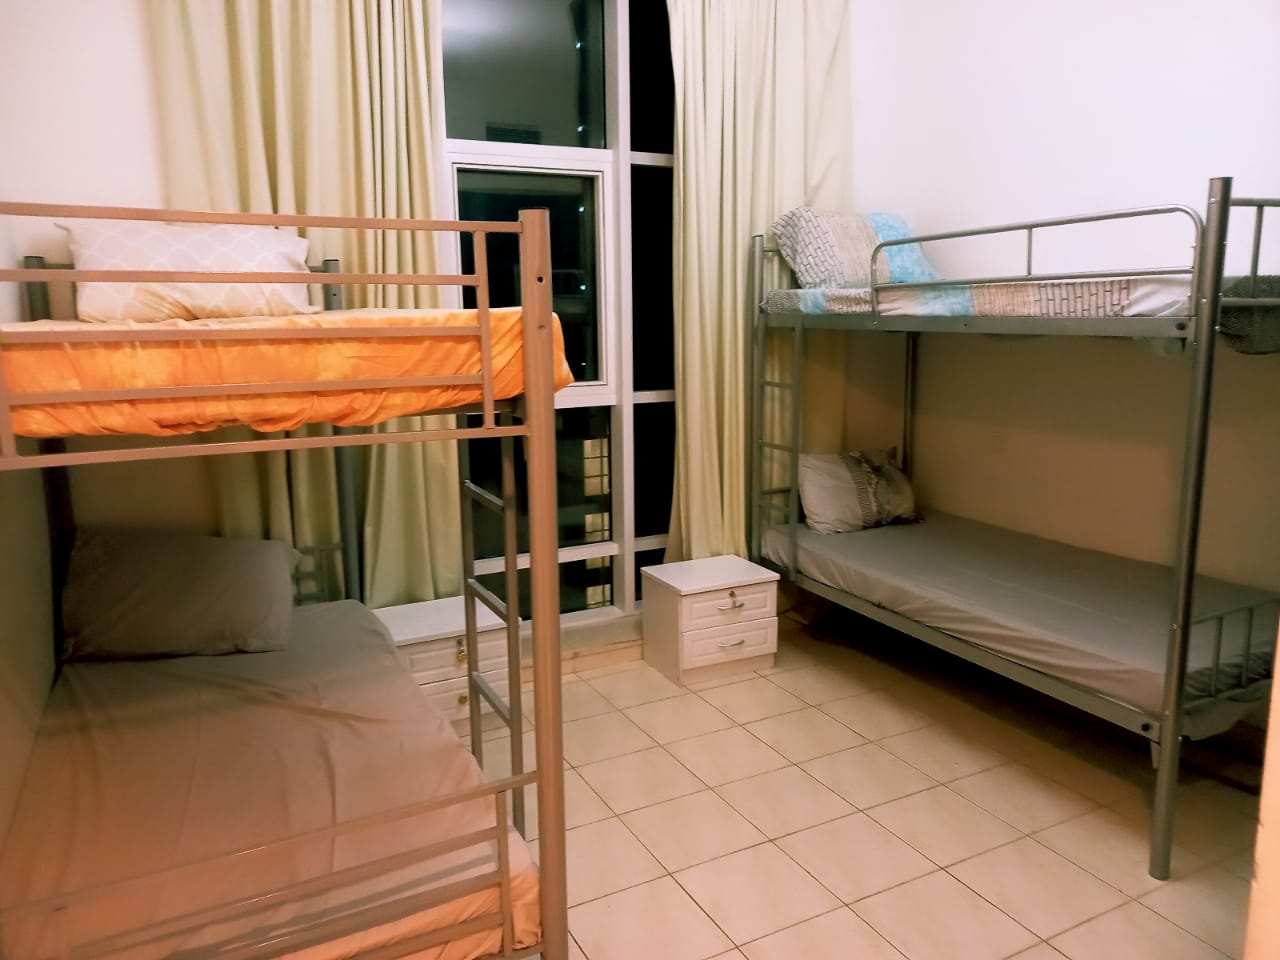 bunker beds available for both male and female in tecom